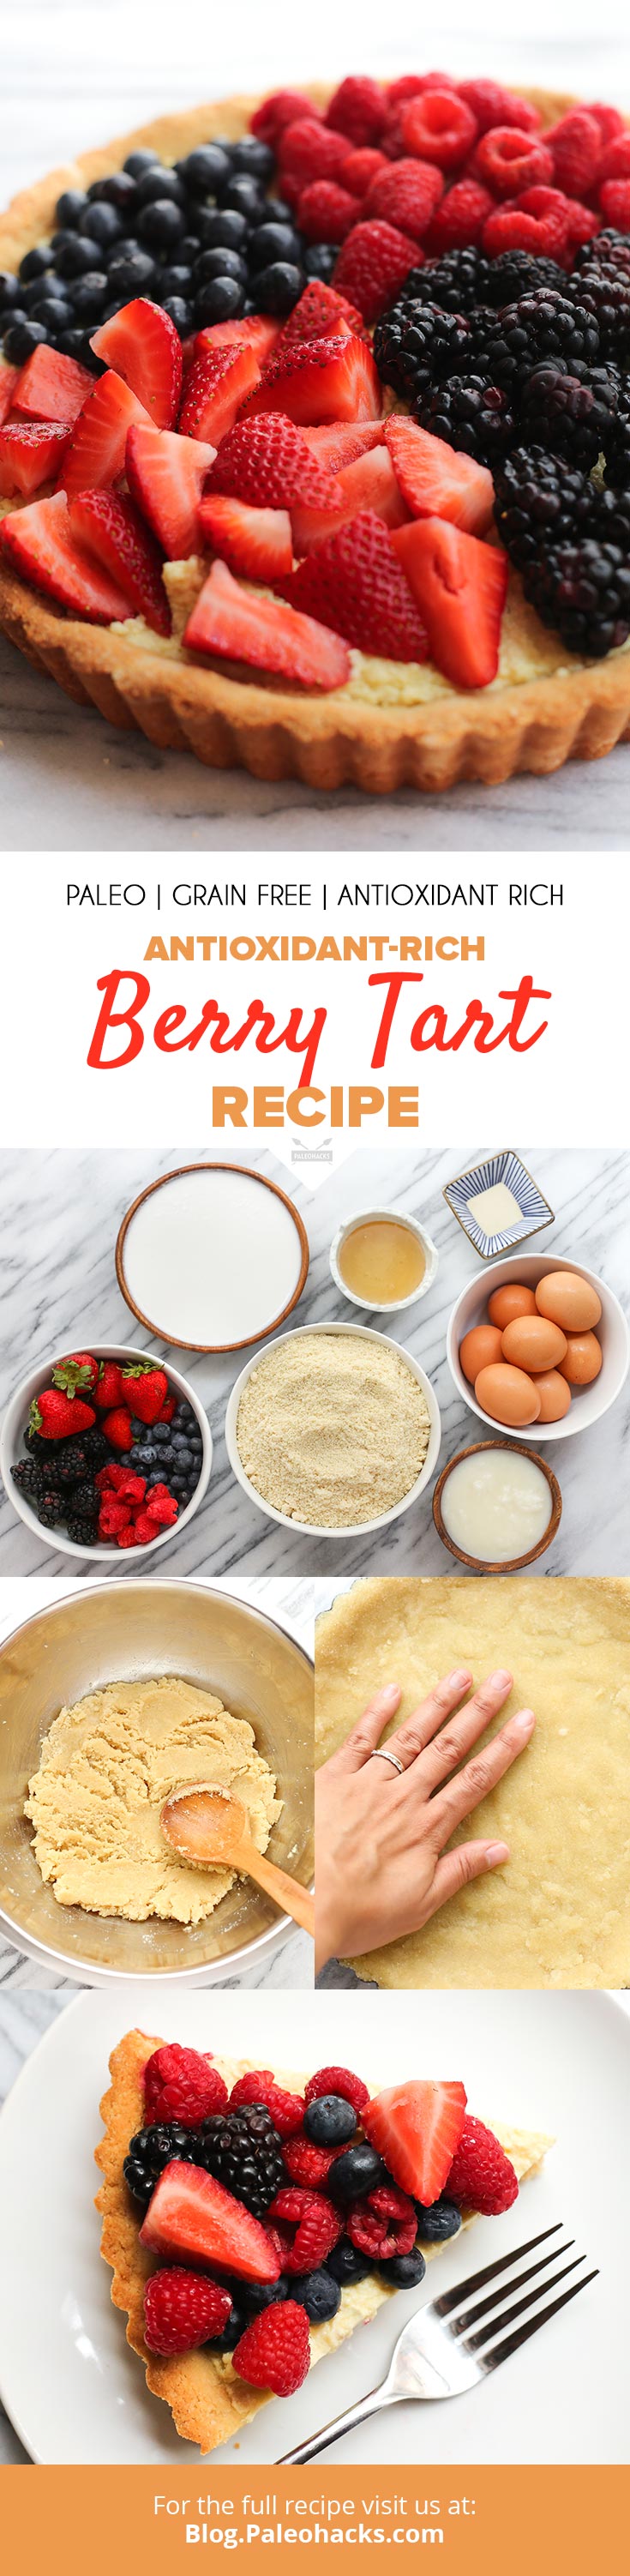 Whip up this fresh tart with a creamy coconut filling, delicious grain-free crust, and topped with antioxidant-rich berries.